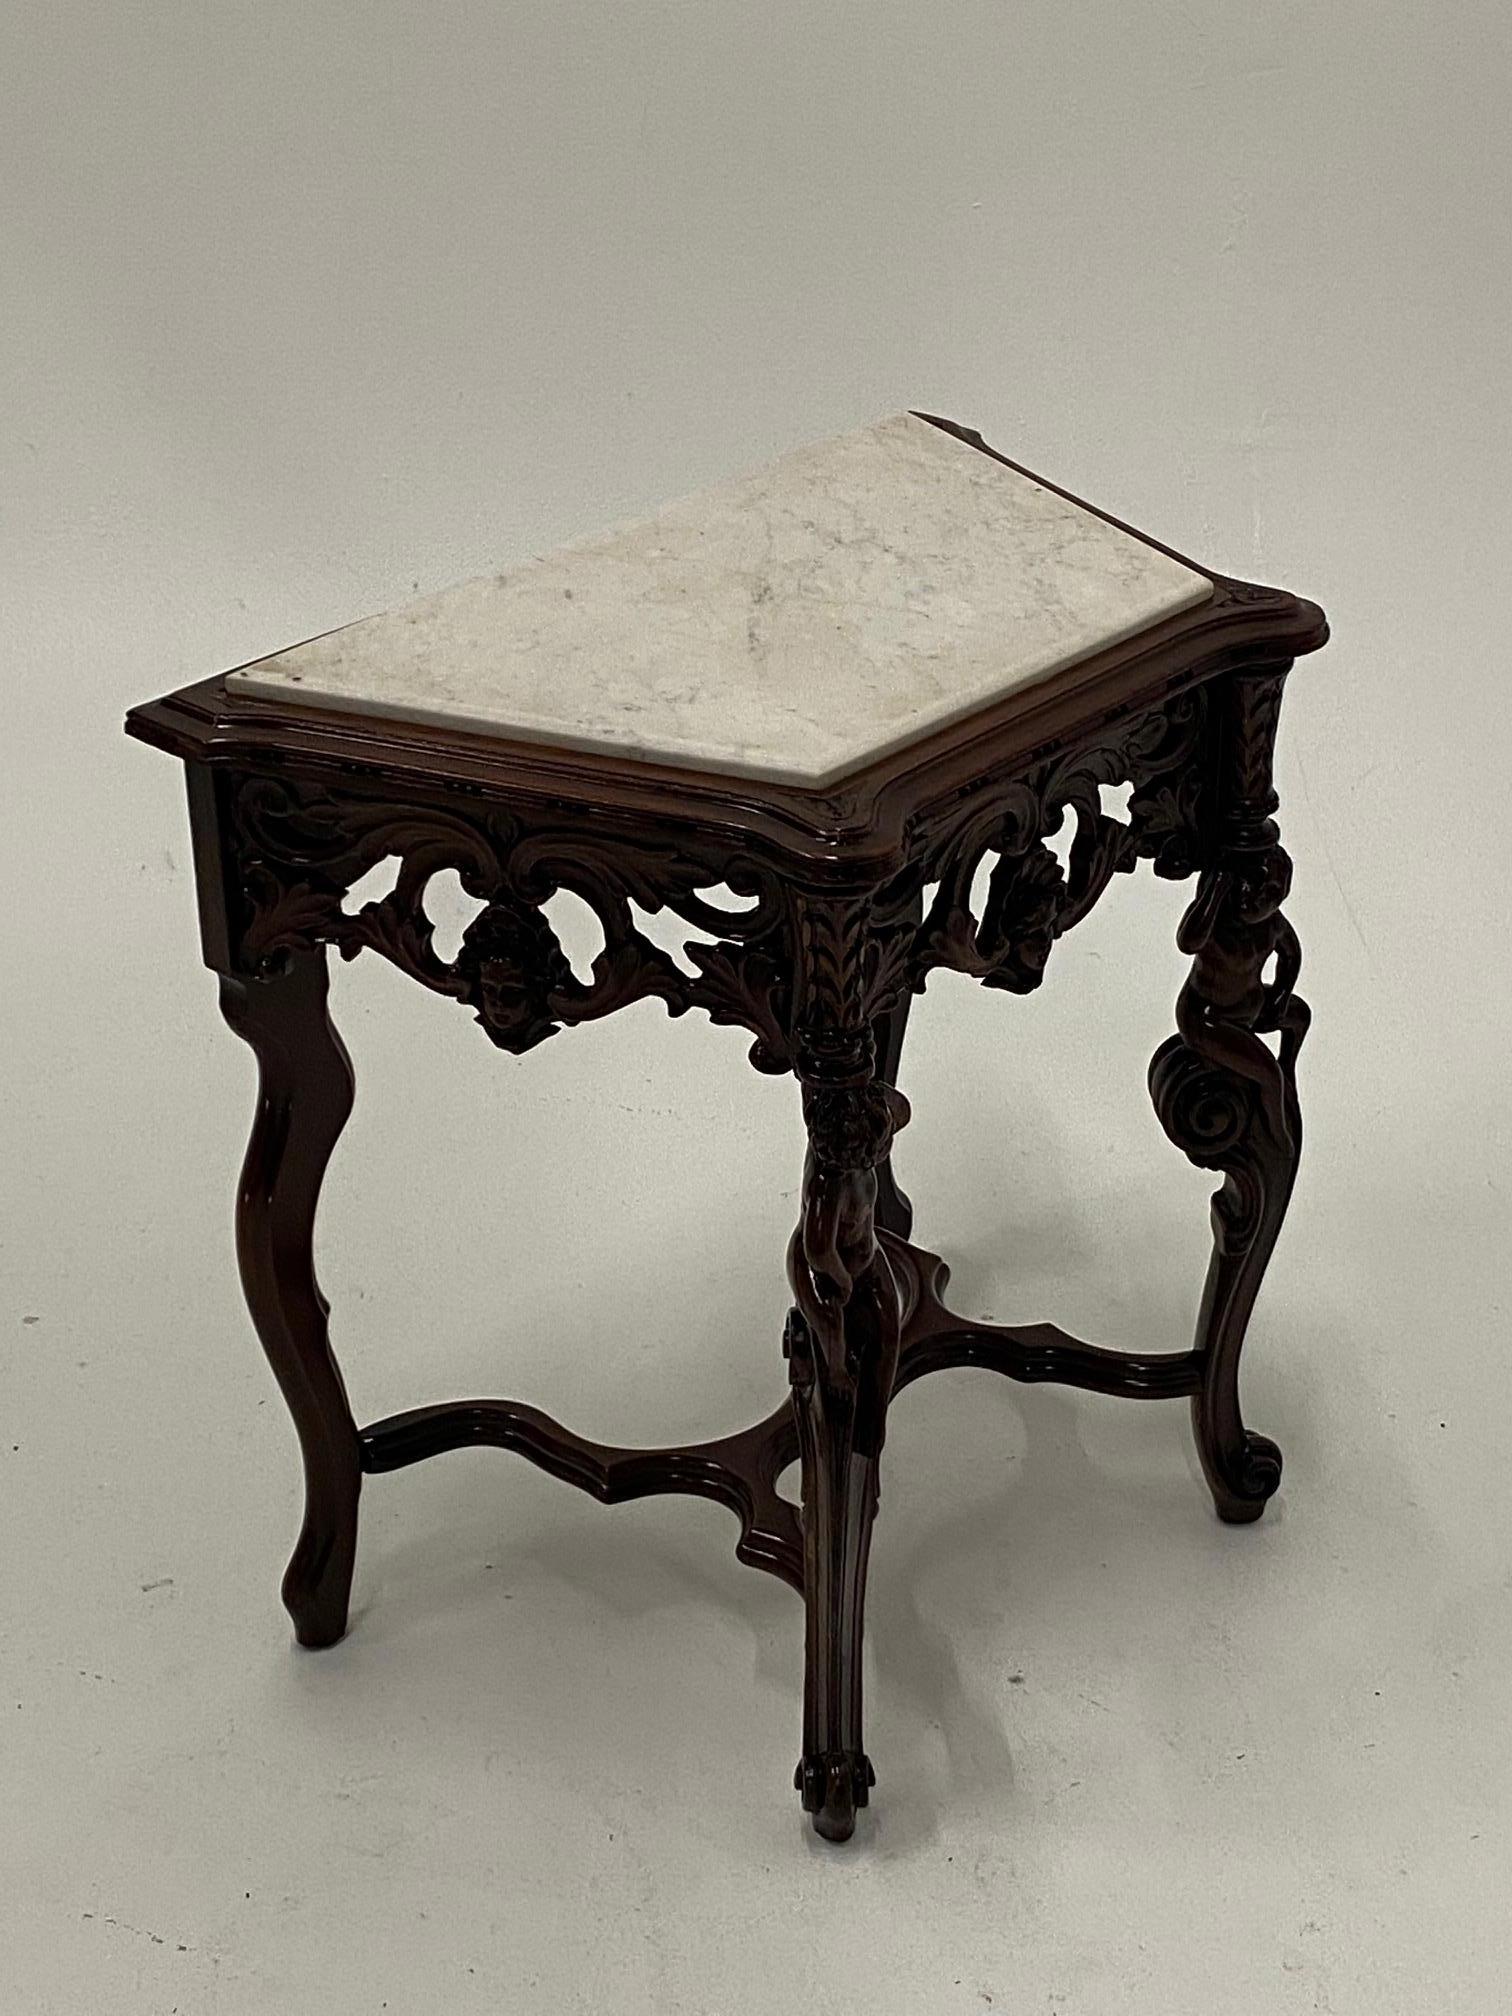 A lovely vintage side or end table with an interesting skewed rectangular shape and ornately carved mahogany base with putti. Top is original white marble.